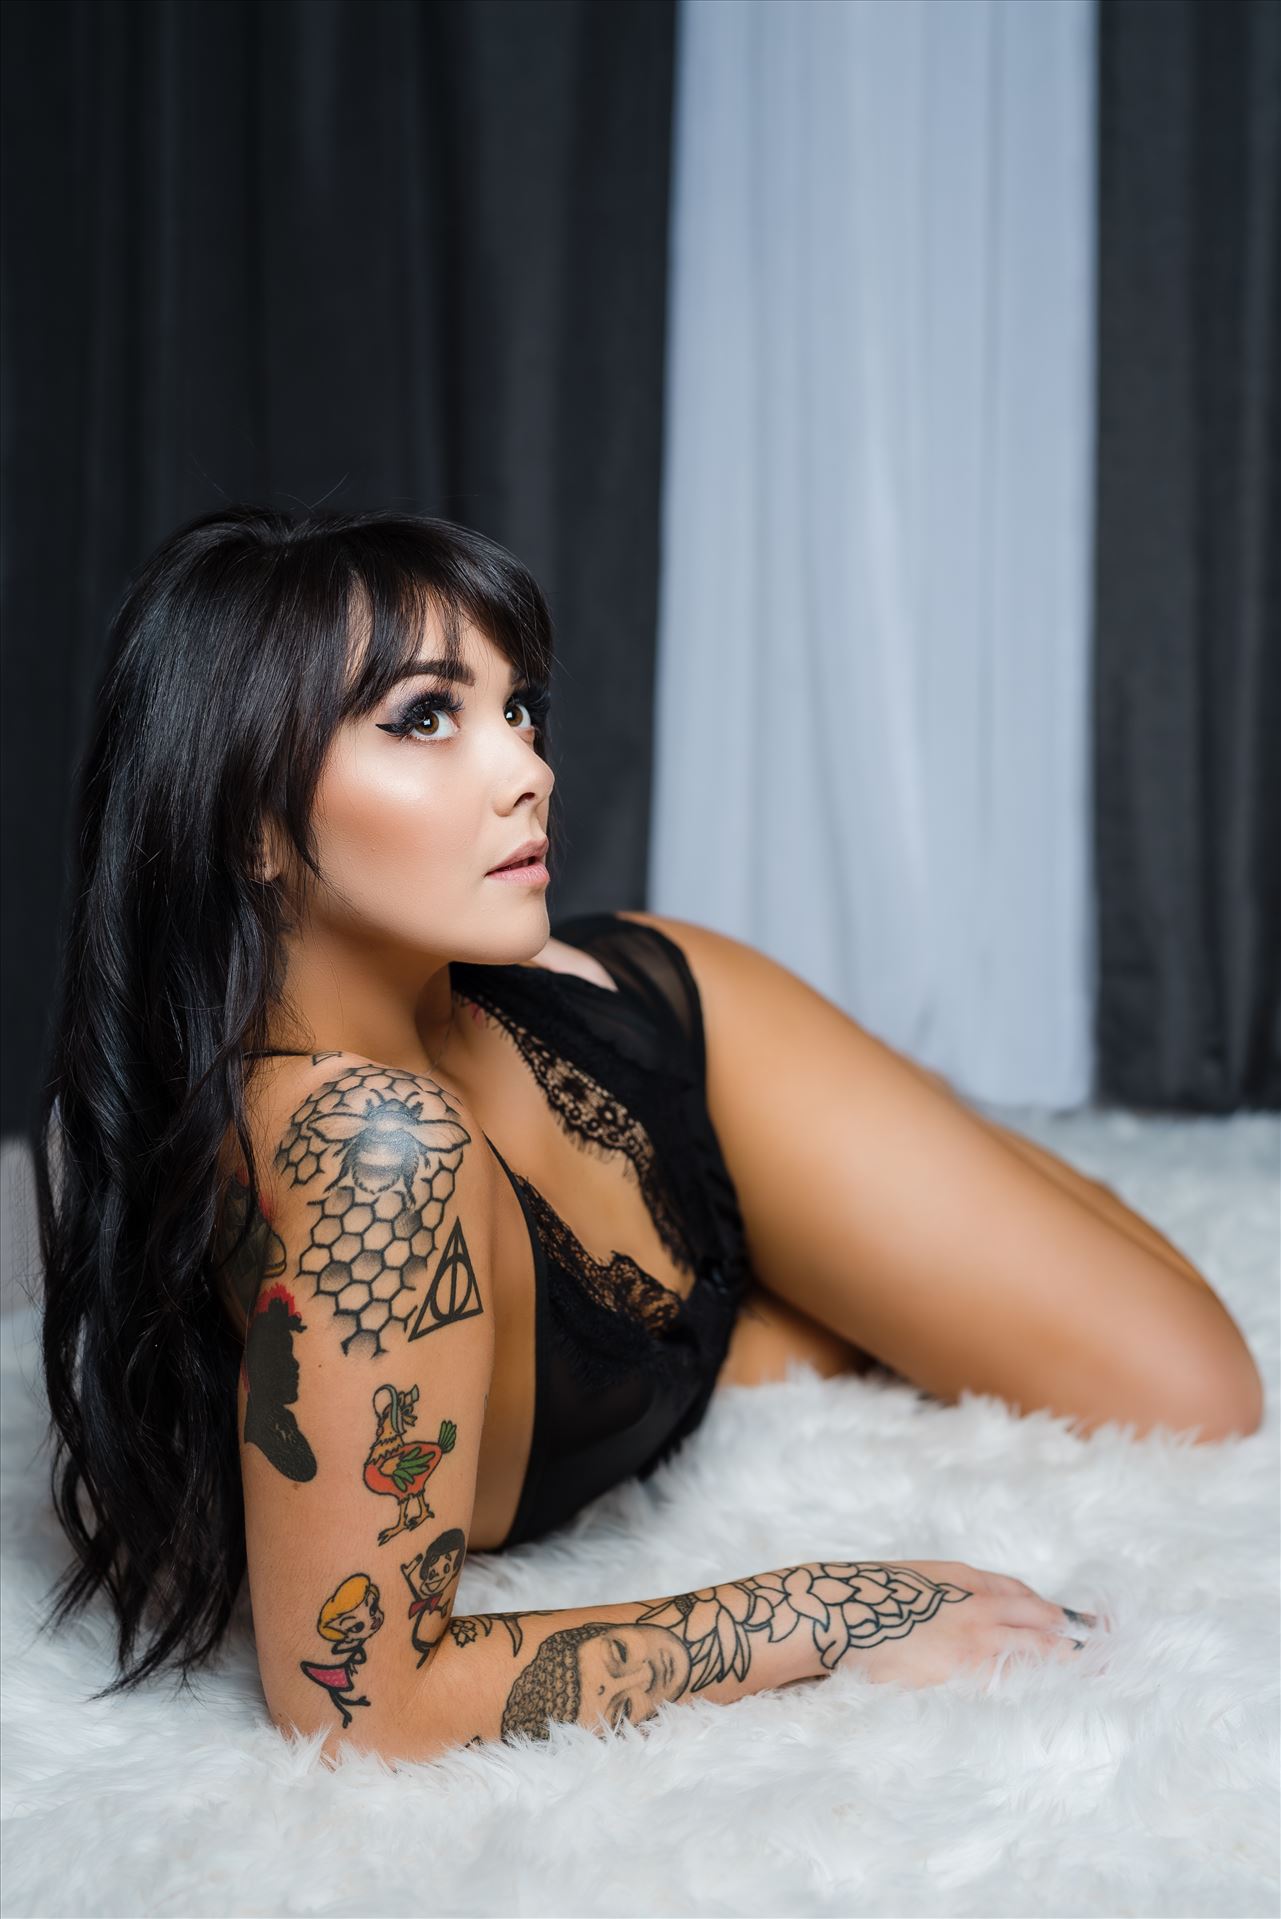 San Luis Obispo County Beachfront Boudoir 19 - Beachfront Boudoir by Mirror's Edge Photography, San Luis Obispo County's Number One Luxury Boudoir Photography Experience.  Promoting body positive movement, empowerment, confidence and self love.  Tattoos and beautiful. by Sarah Williams